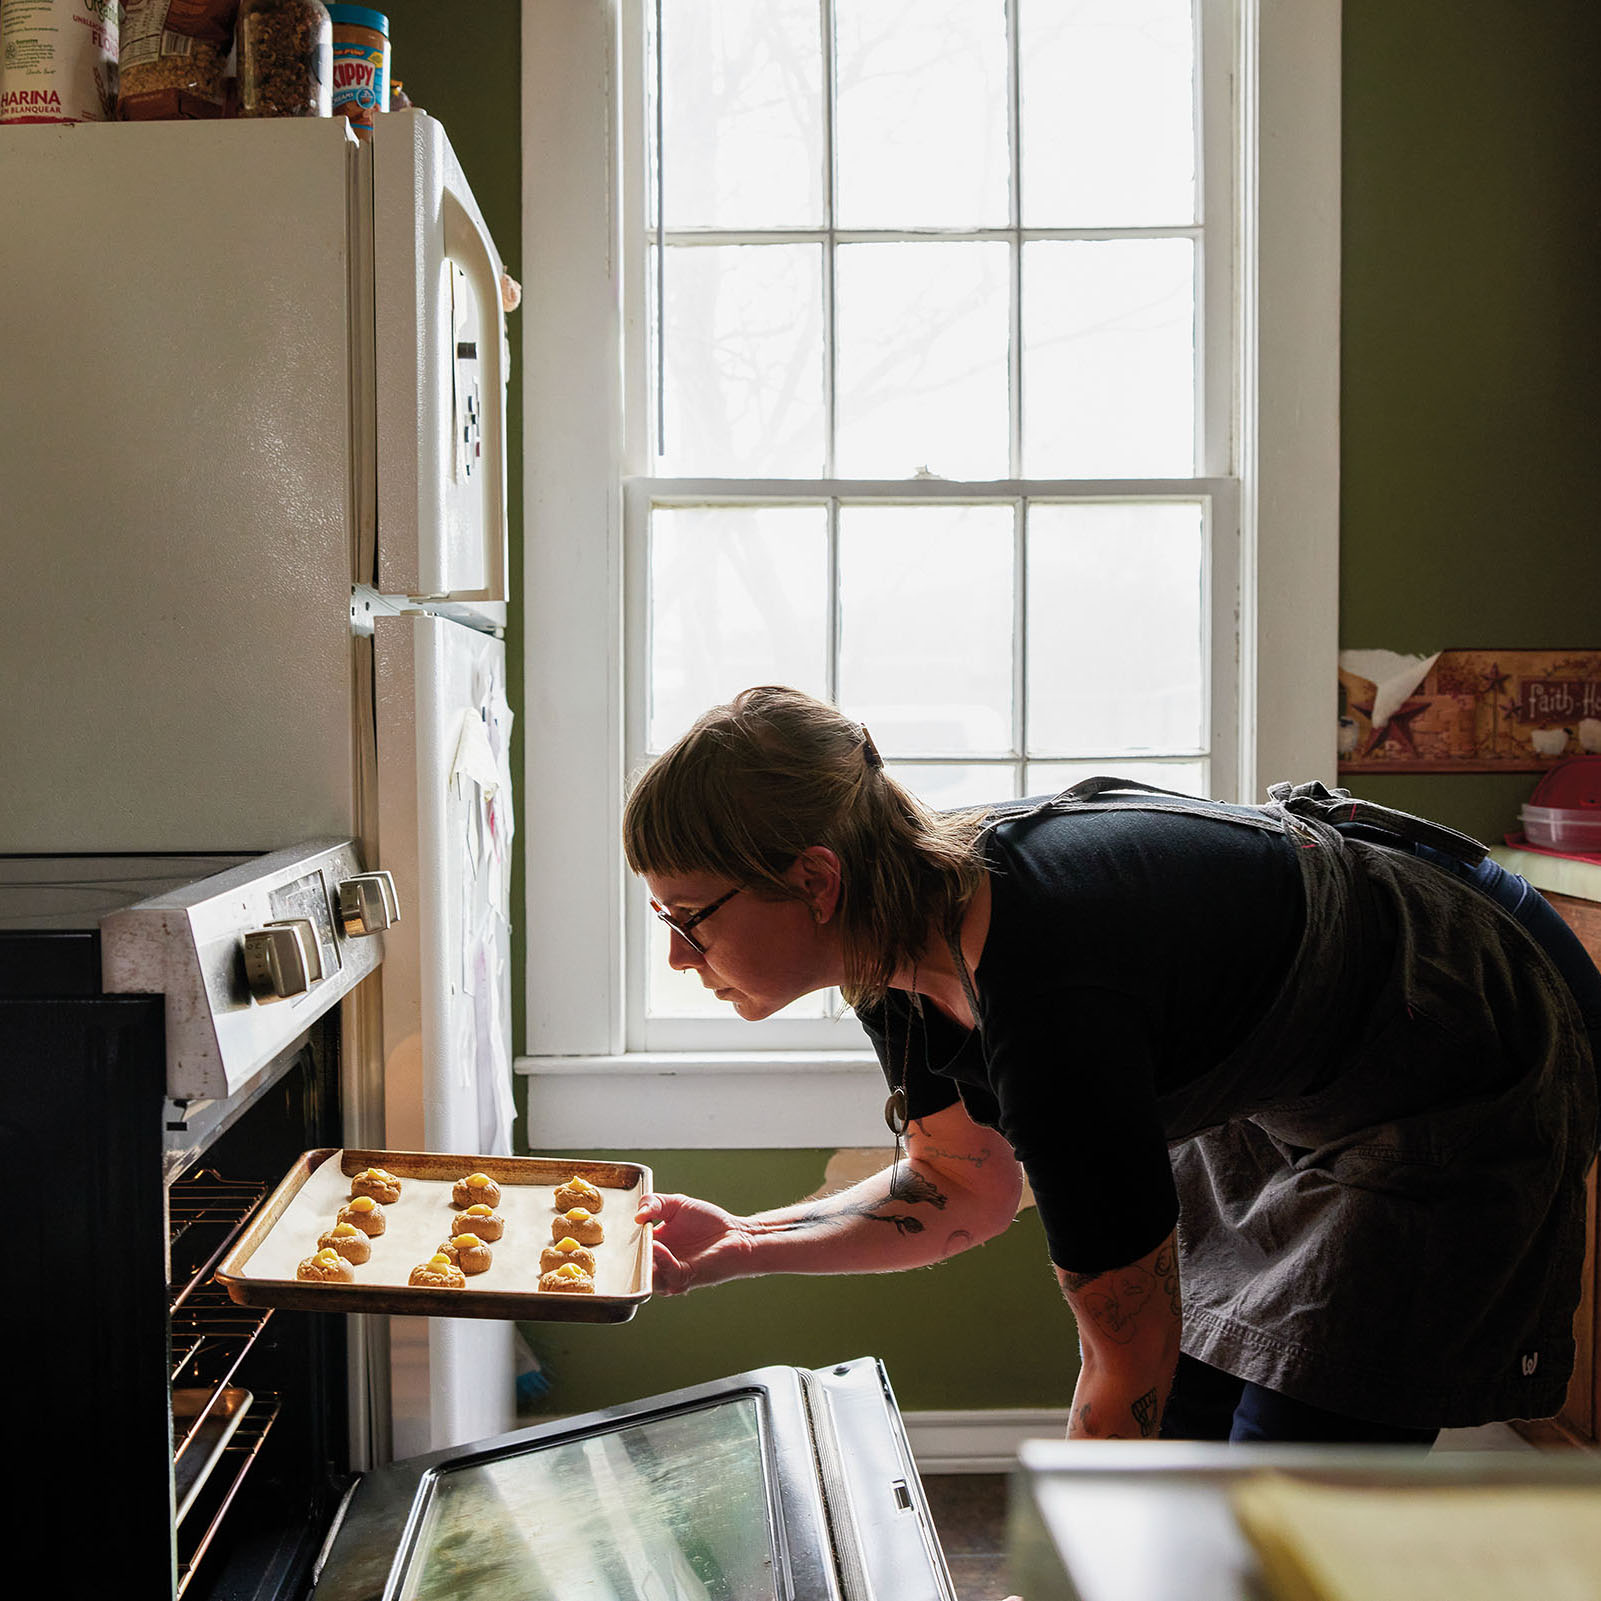 A person places baked goods into an oven in front of a large window